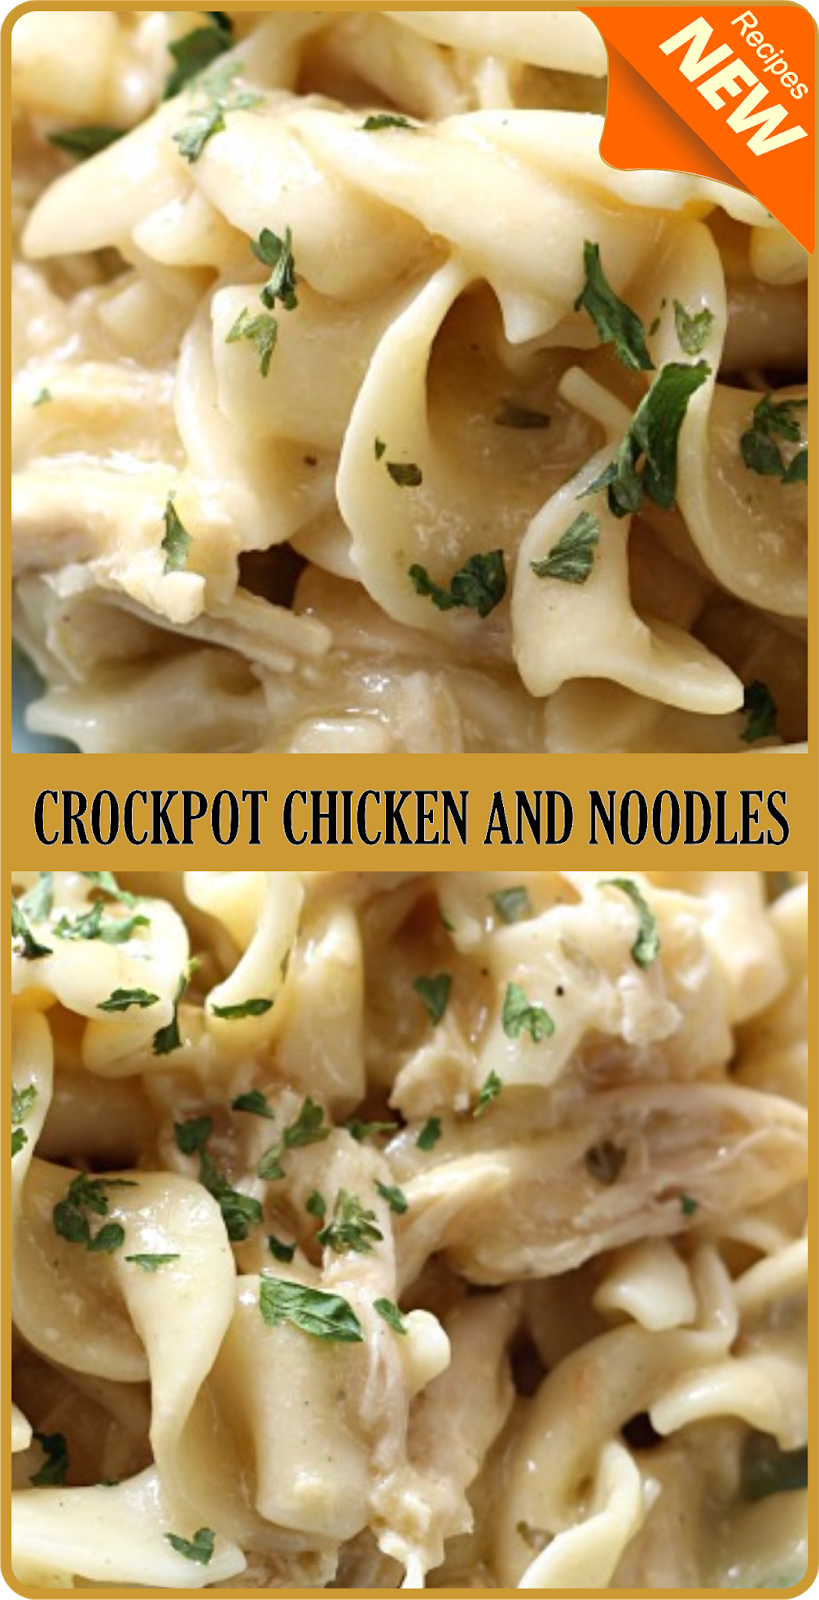 CROCKPOT CHICKEN AND NOODLES | Amzing Food